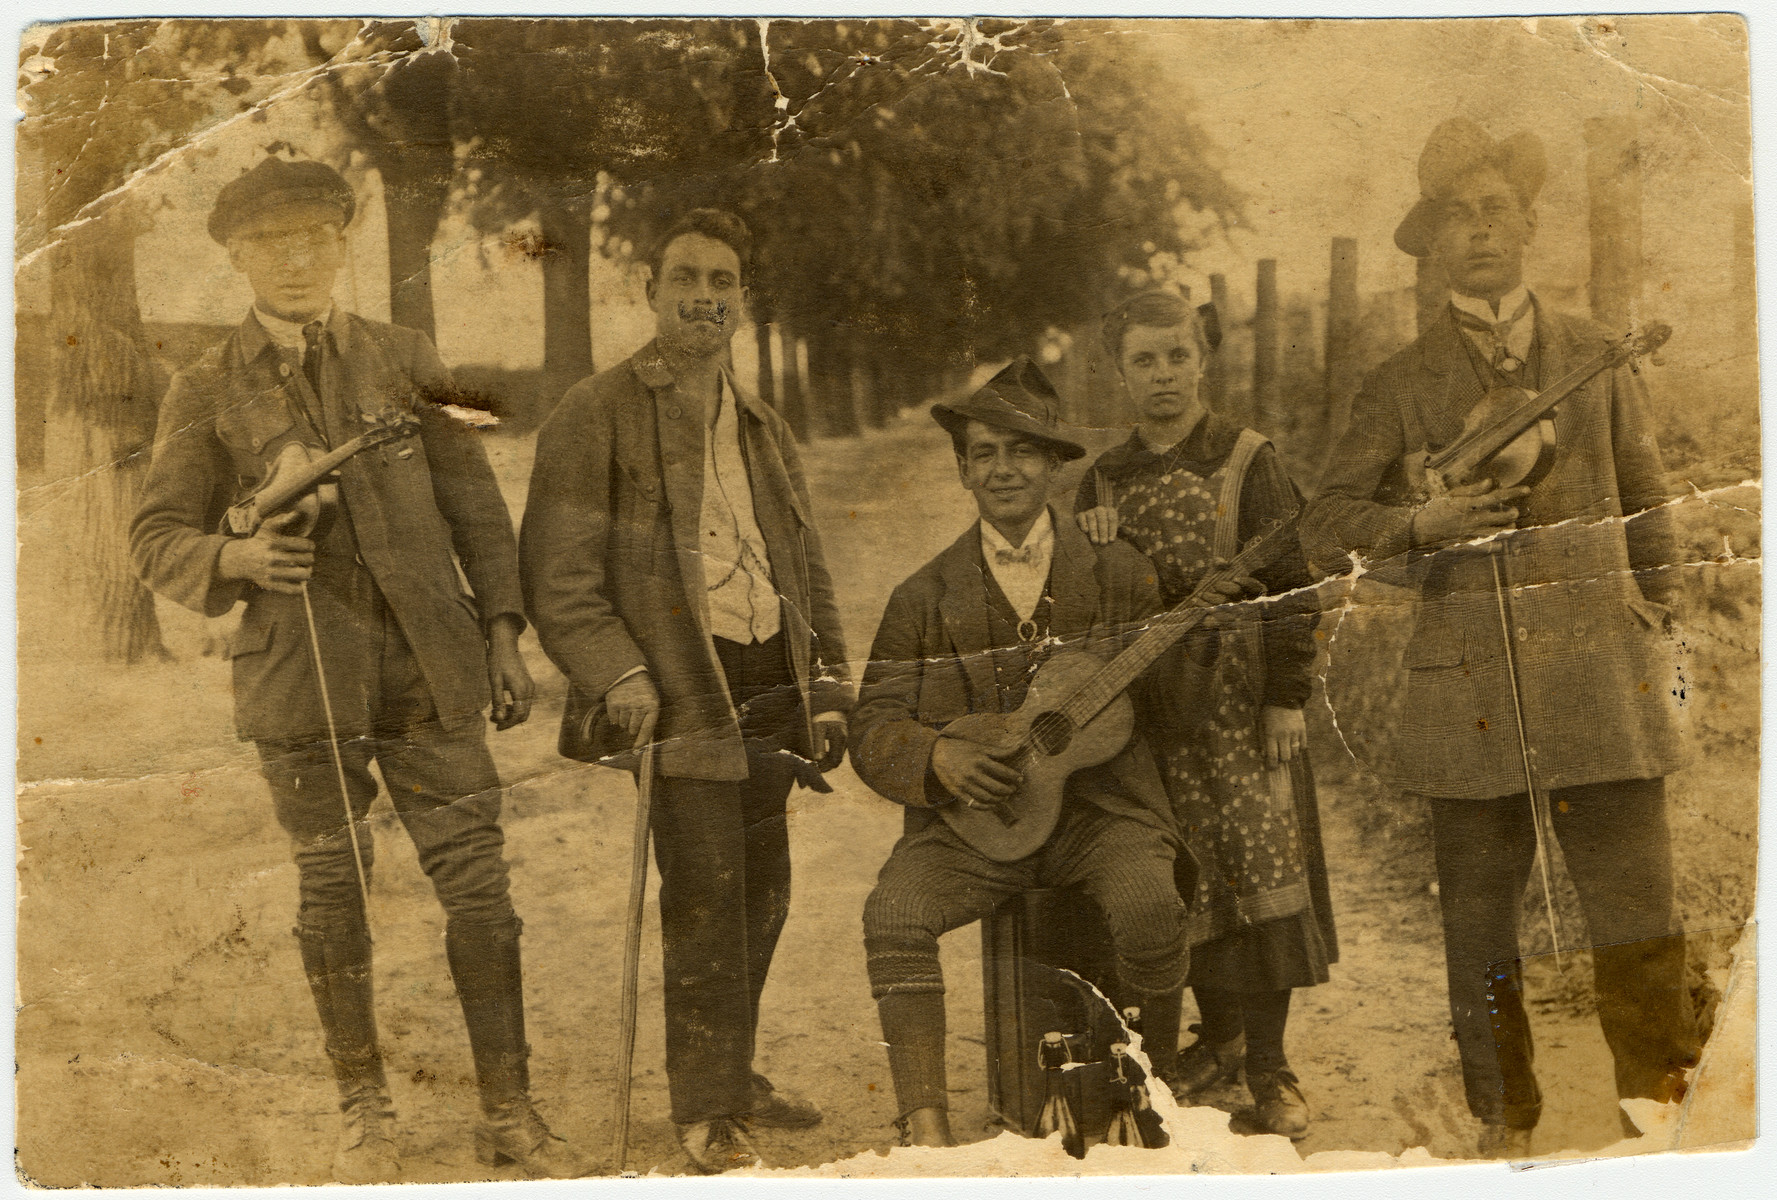 Members of a French-Hungarian Romani musical band pose for a photograph with their instruments.  

Pictured are members of the donor's family: in the middle, with the cane, is donor's grandfather, Johann Winterstein.  Surrounding him are his cousins.  The band was mostly performing in France.